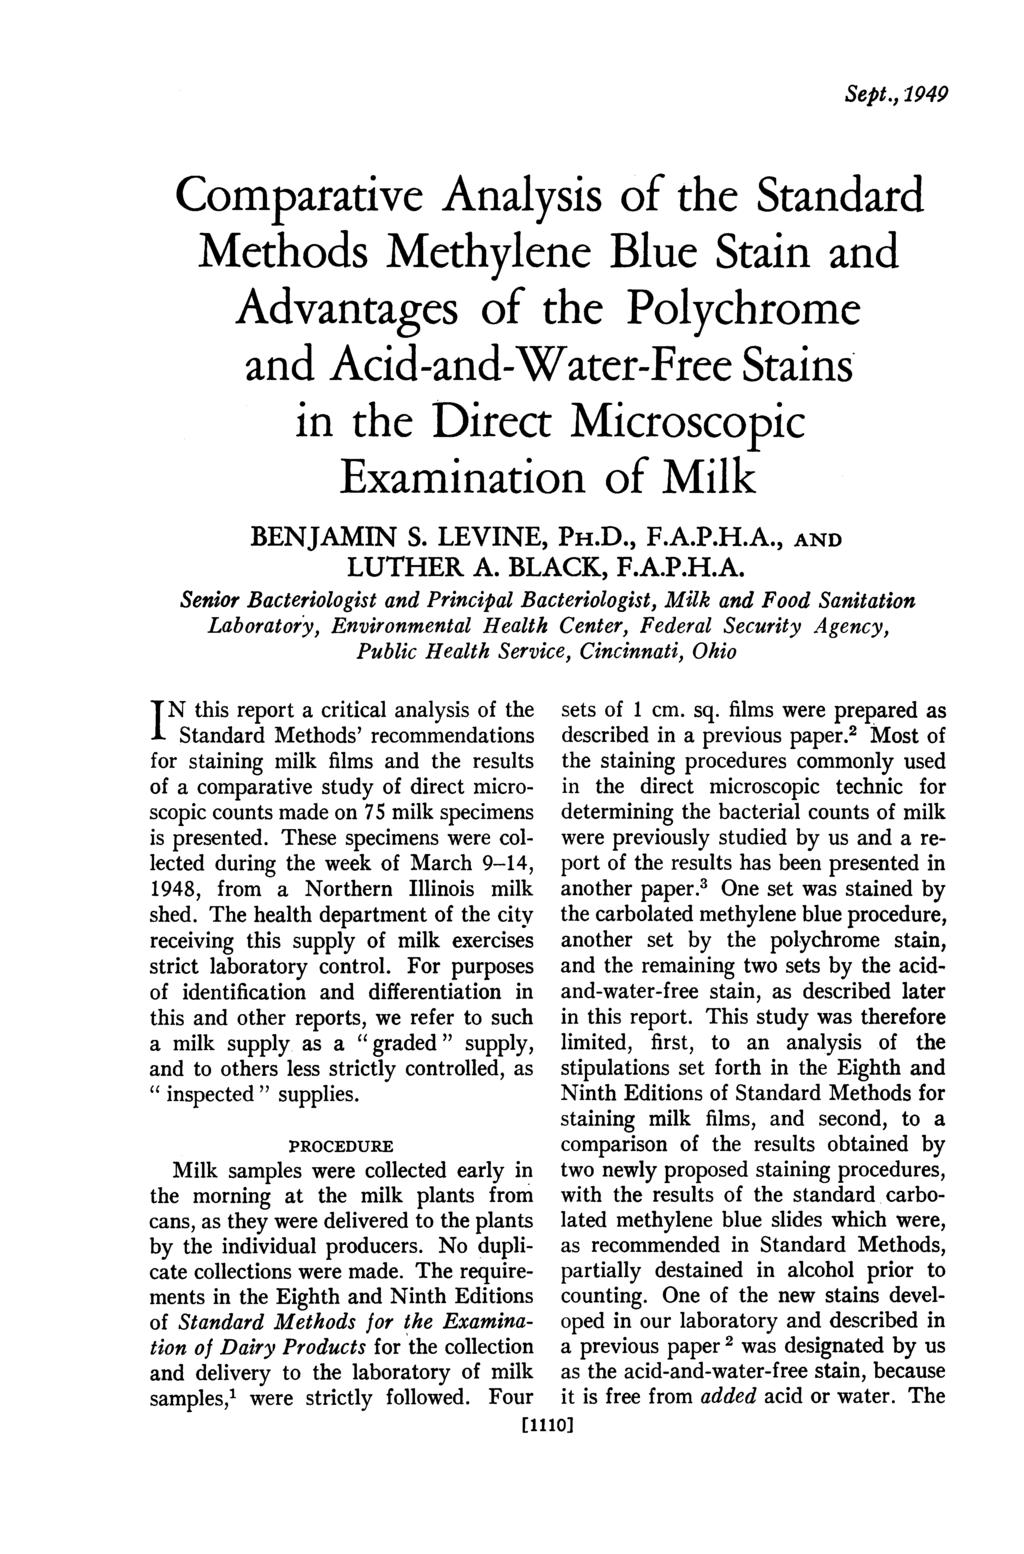 Sept., 1949 Comparative Analysis of the Standard Methods Methylene Blue Stain and Advantages of the Polychrome and Acid-and-Water-Free Stains in the Direct Microscopic Examination of Milk BENJAMIN S.